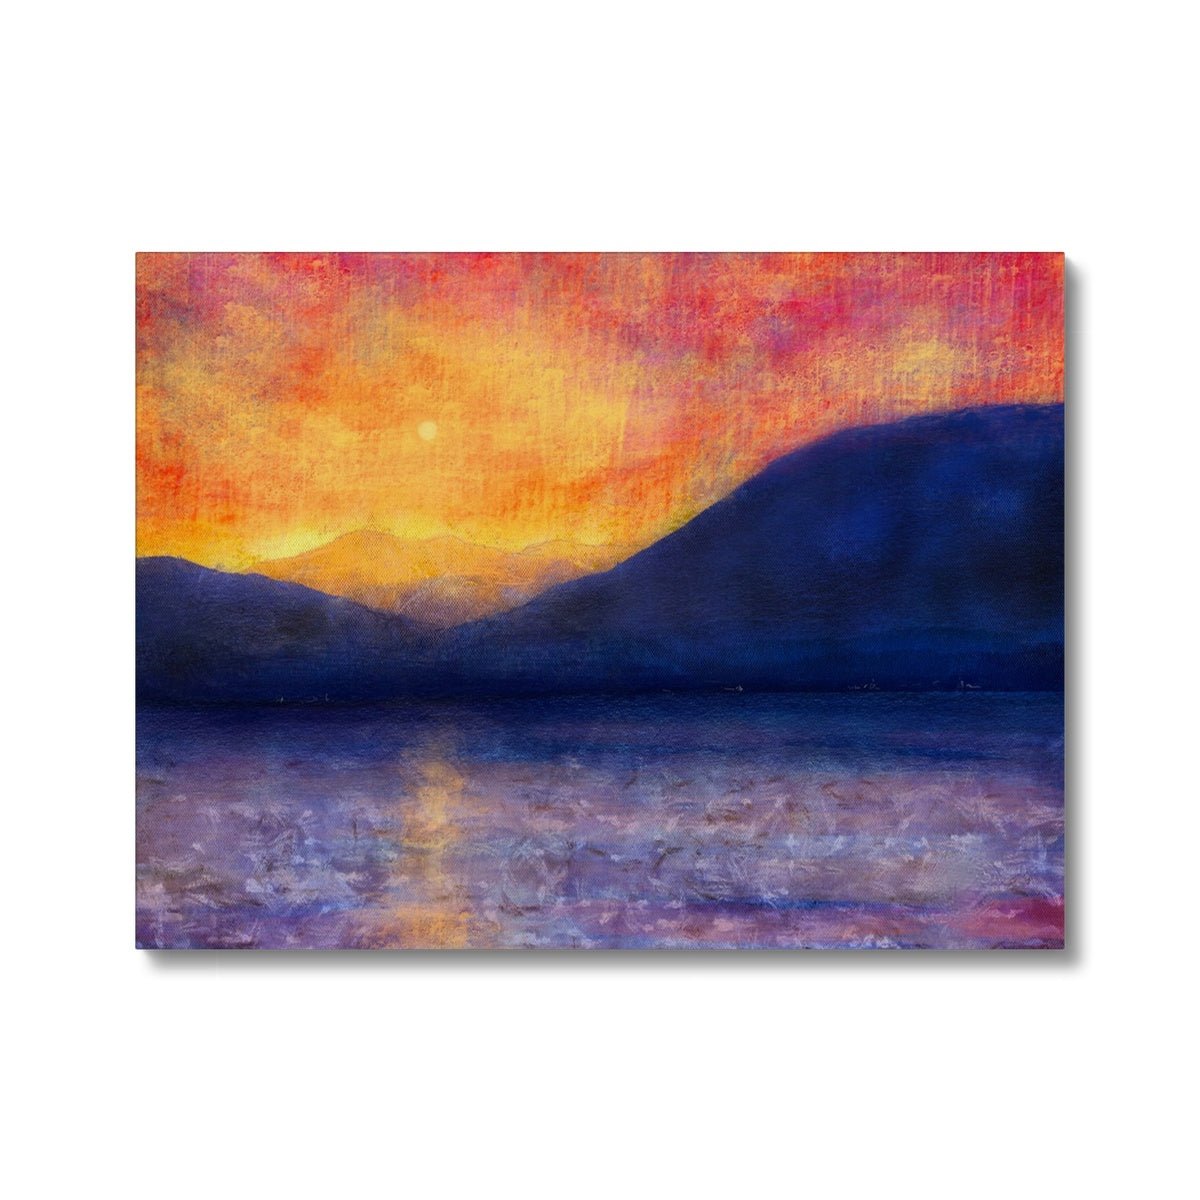 Sunset Approaching Mull Painting | Canvas From Scotland-Contemporary Stretched Canvas Prints-Hebridean Islands Art Gallery-24"x18"-Paintings, Prints, Homeware, Art Gifts From Scotland By Scottish Artist Kevin Hunter